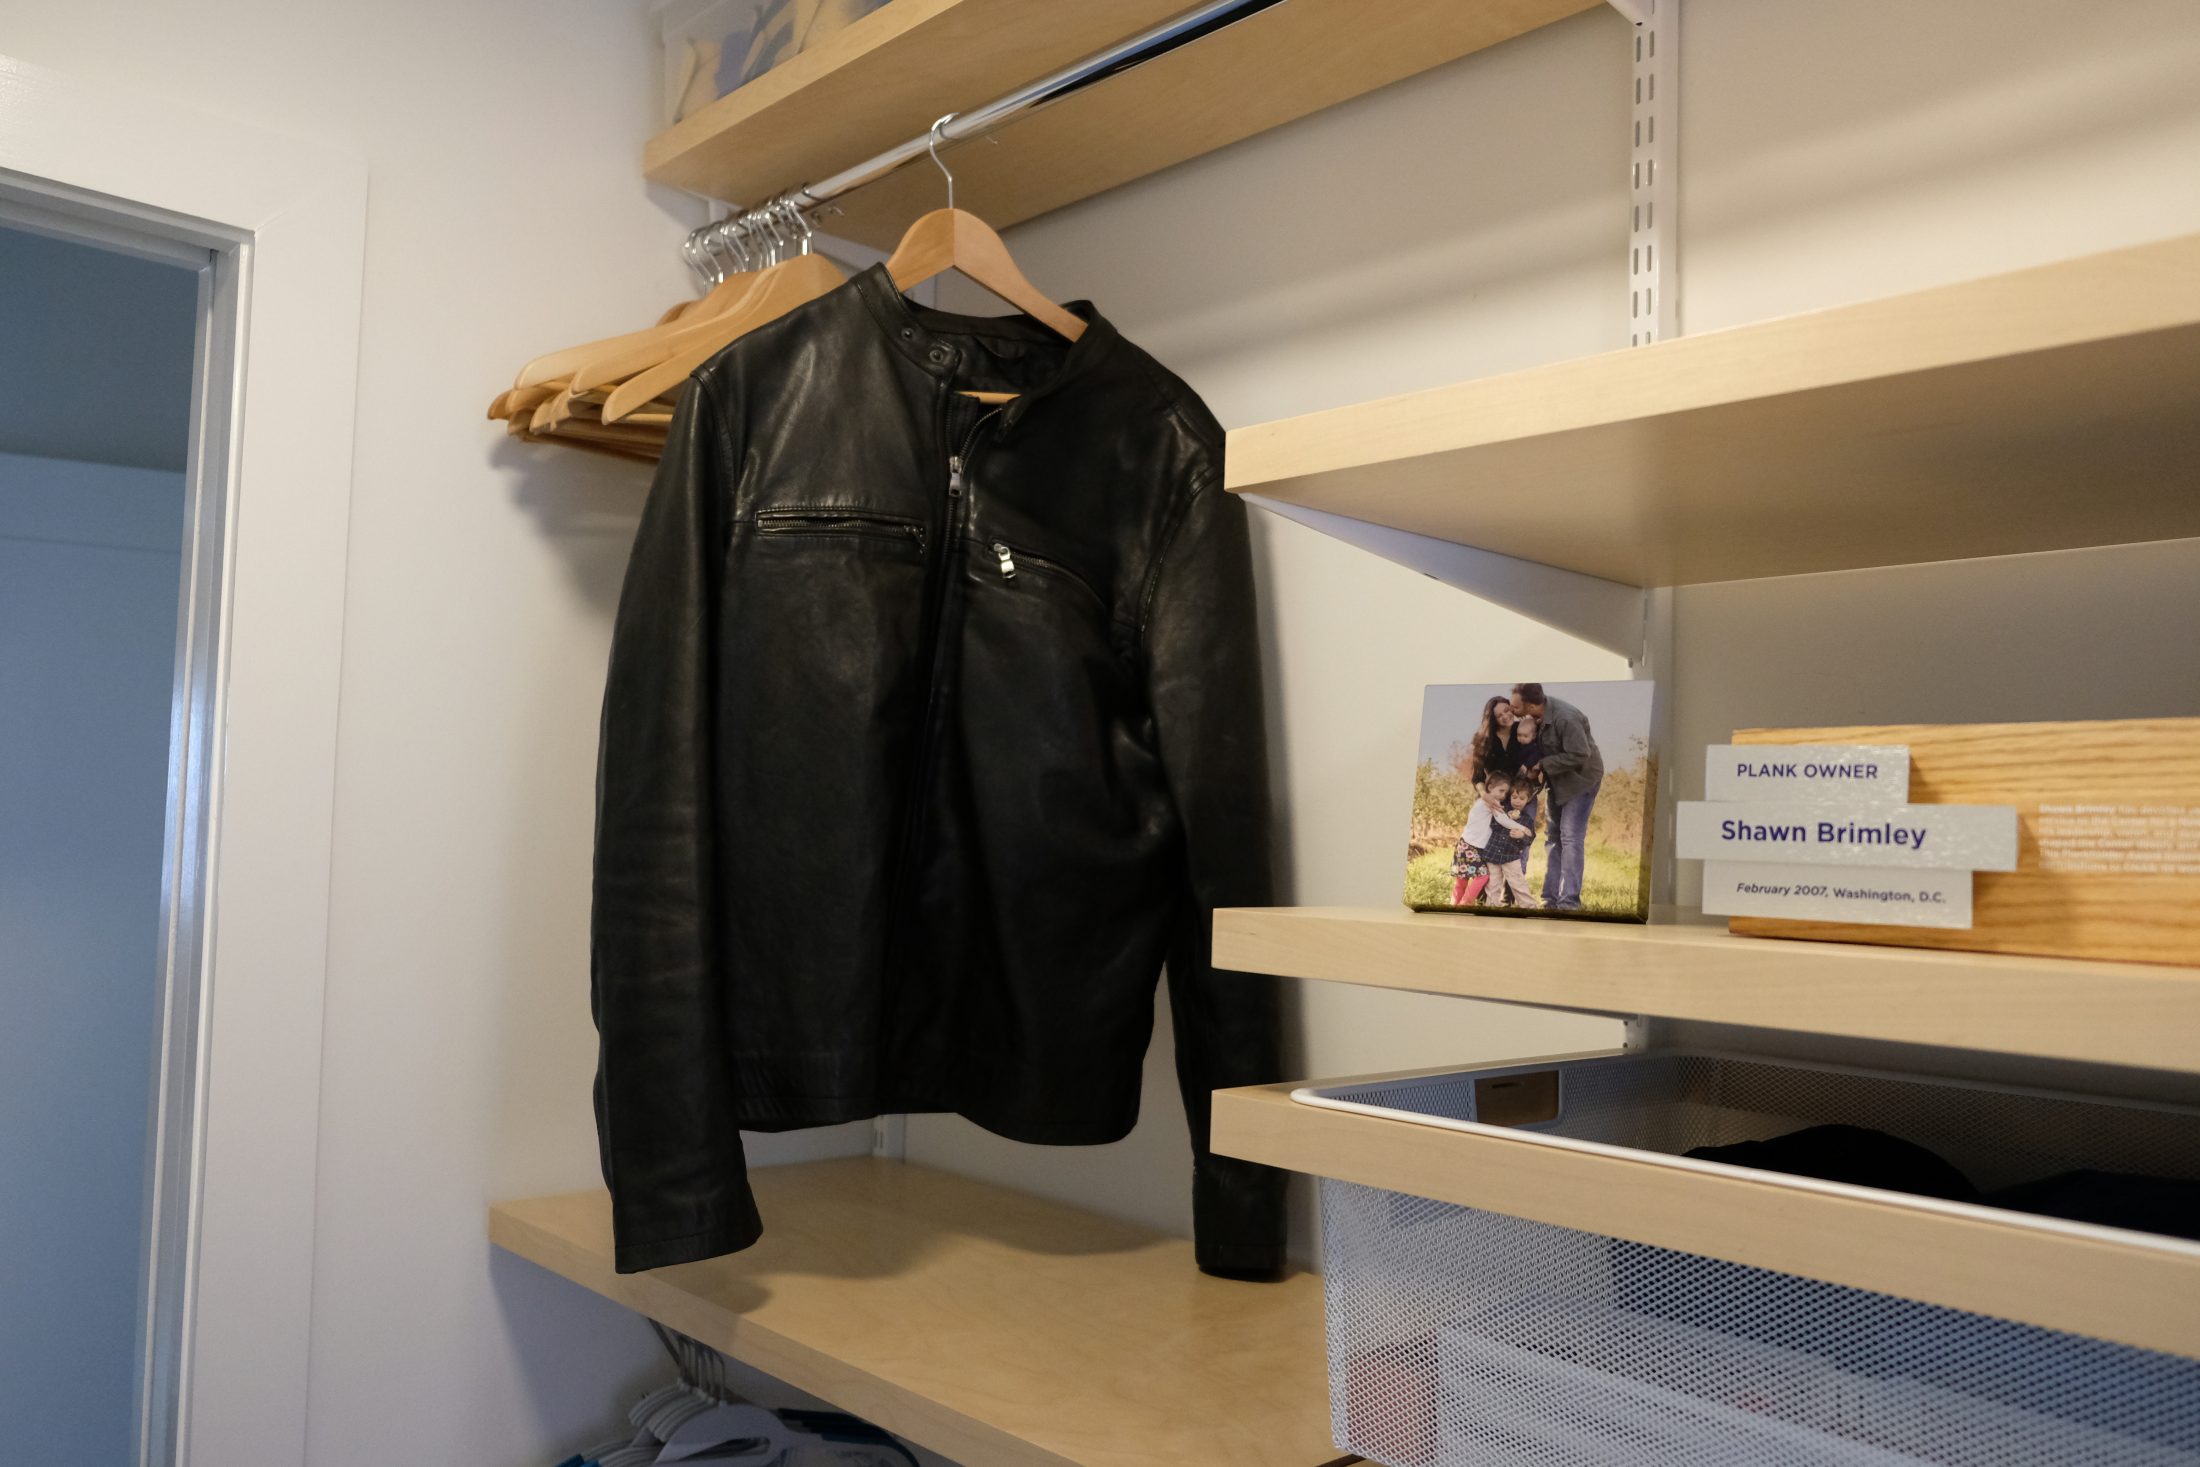 DC widow blog writer Marjorie Brimley's closet with Shawn's leather jacket hanging alone